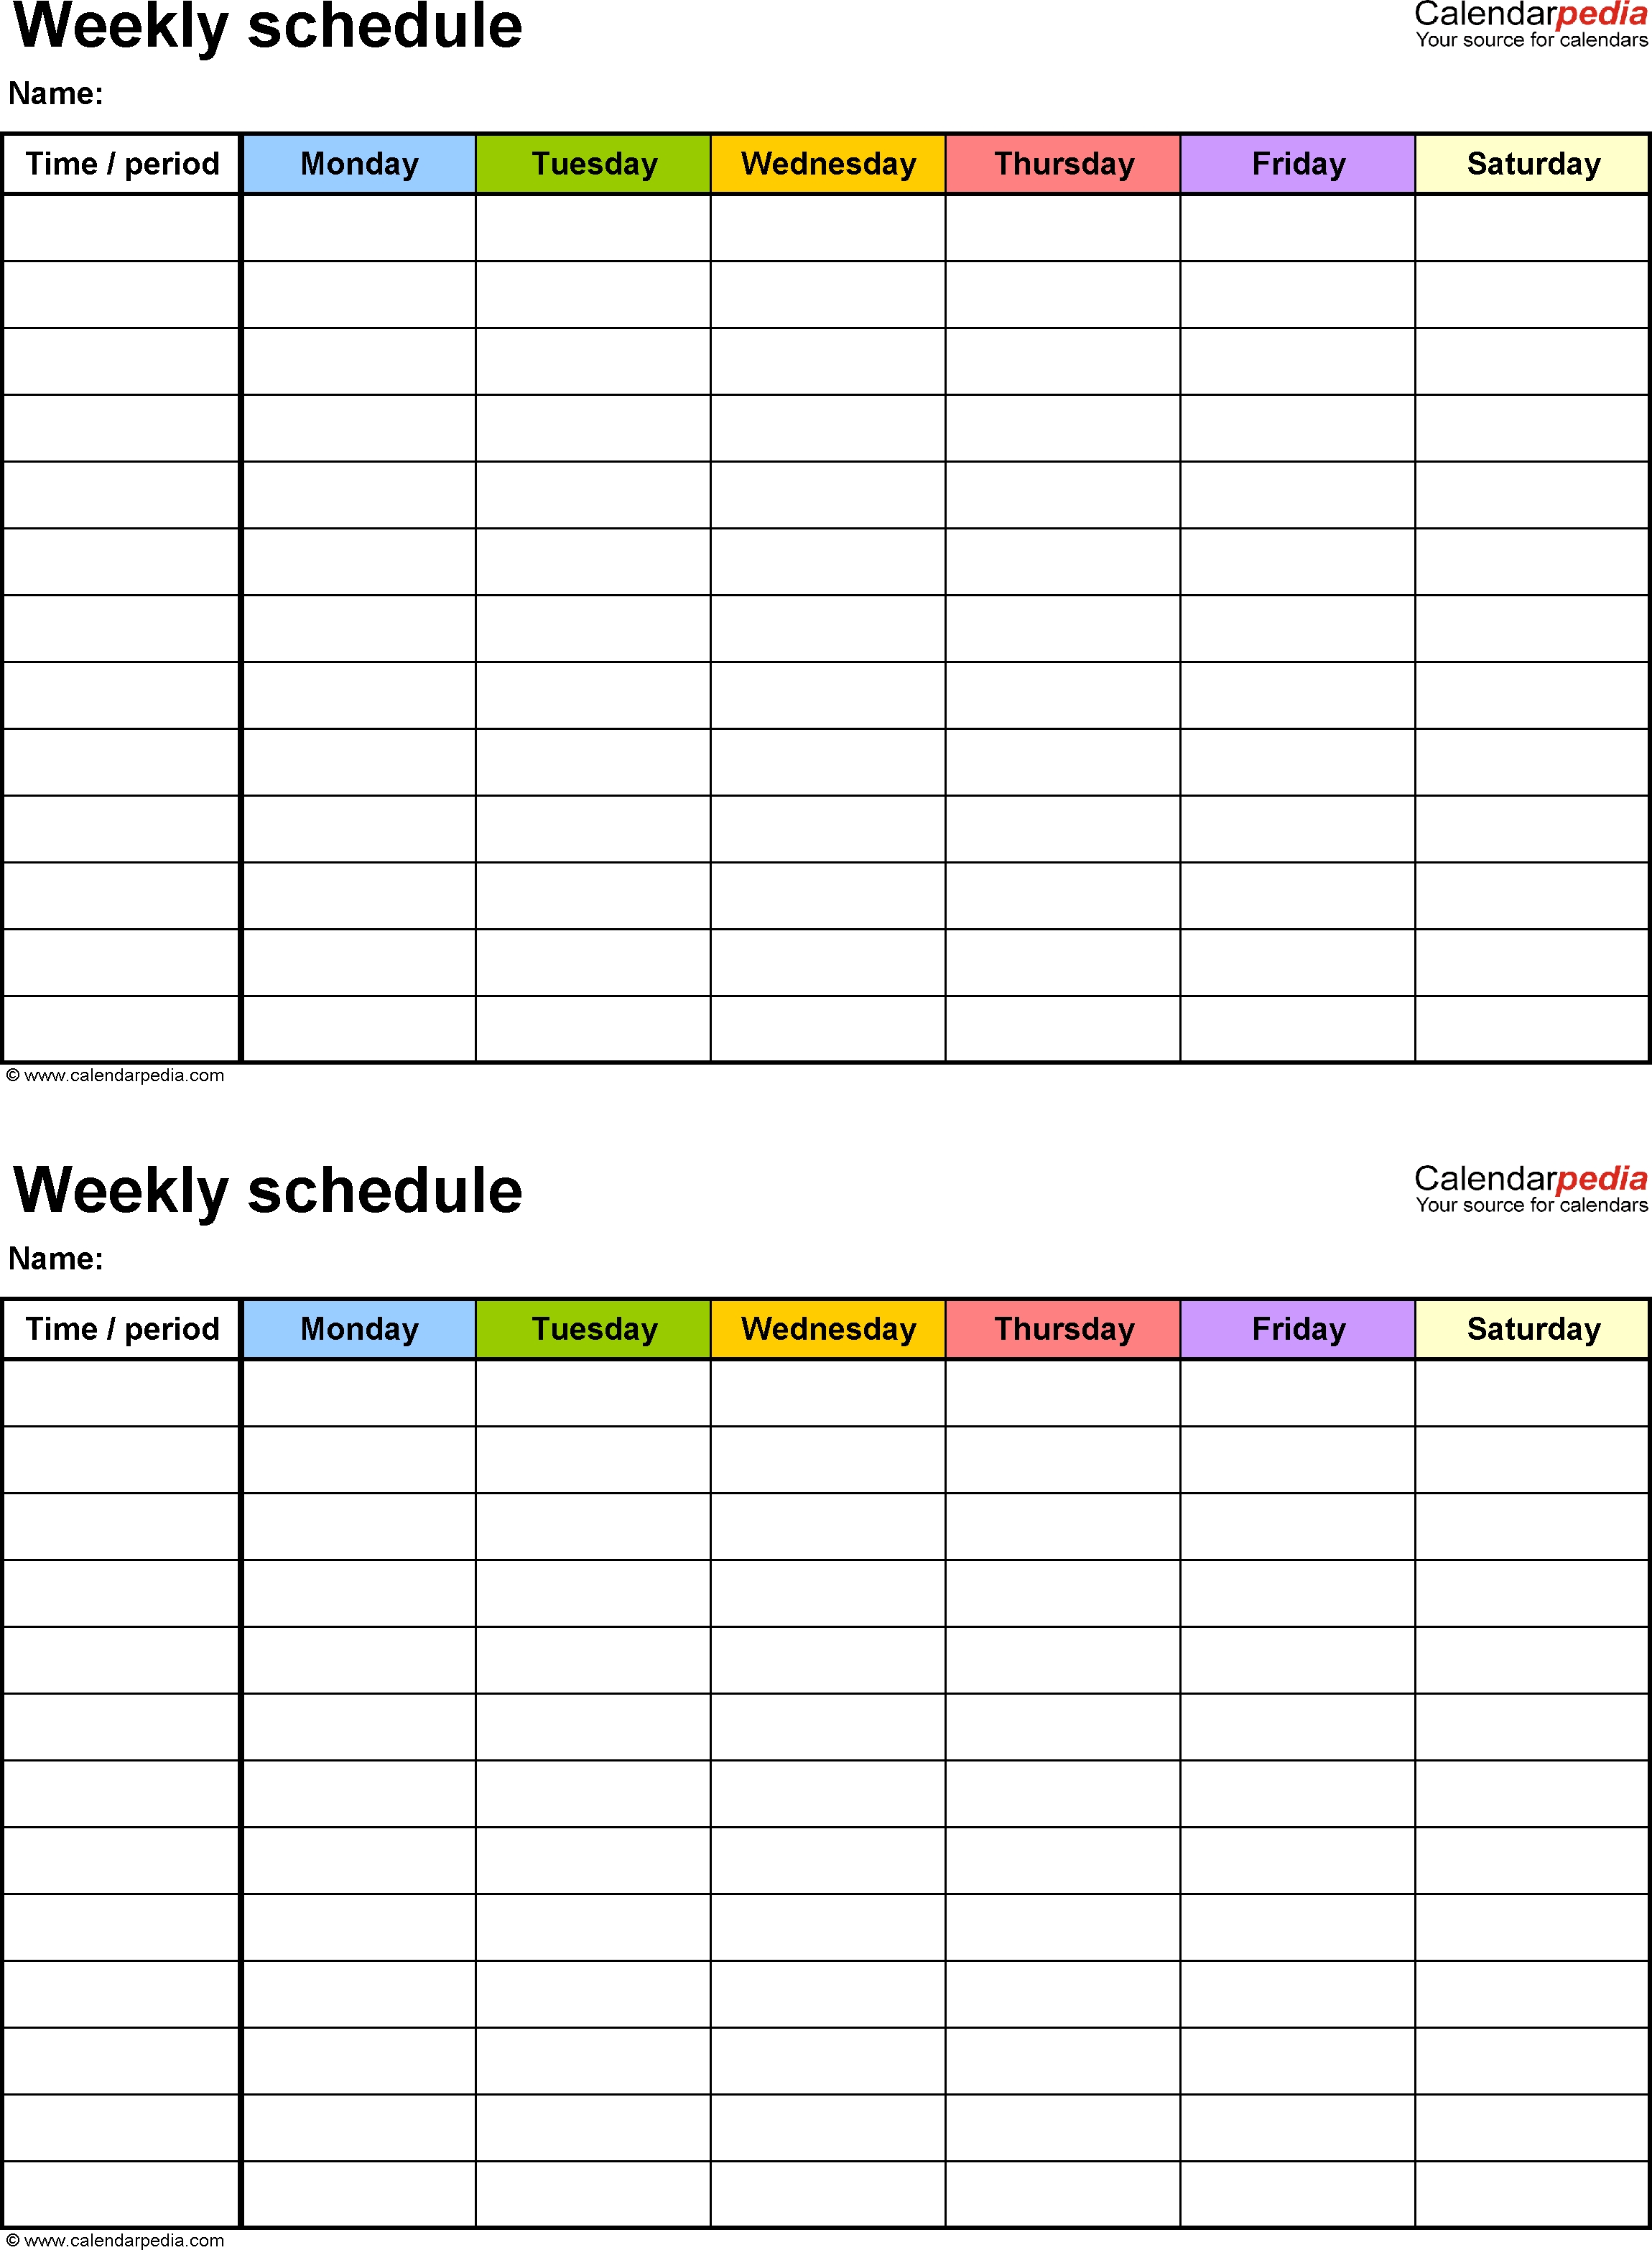 Free Weekly Schedule Templates For Excel - 18 Templates intended for One Week Calendar Template Exercise